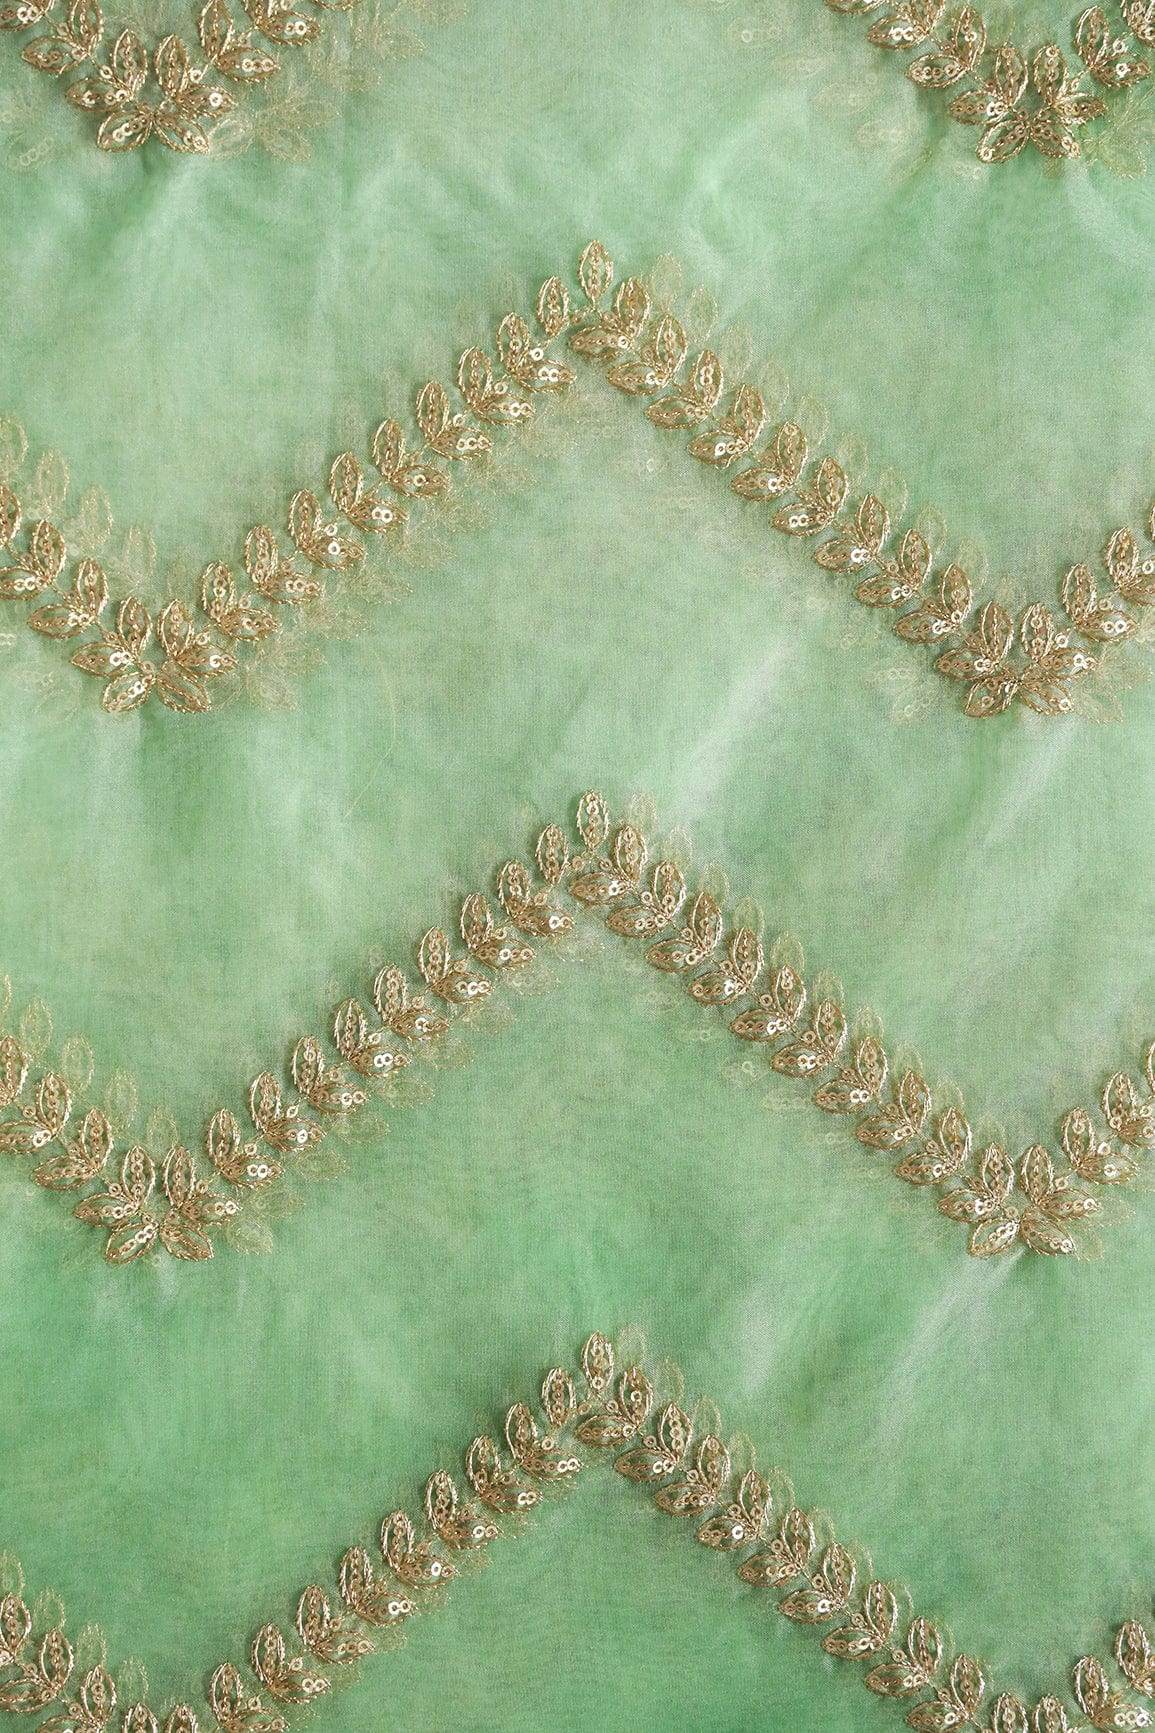 Gold Zari With Gold Sequins Chevron Embroidery Work On Tie & Dye Olive Organza Fabric - doeraa